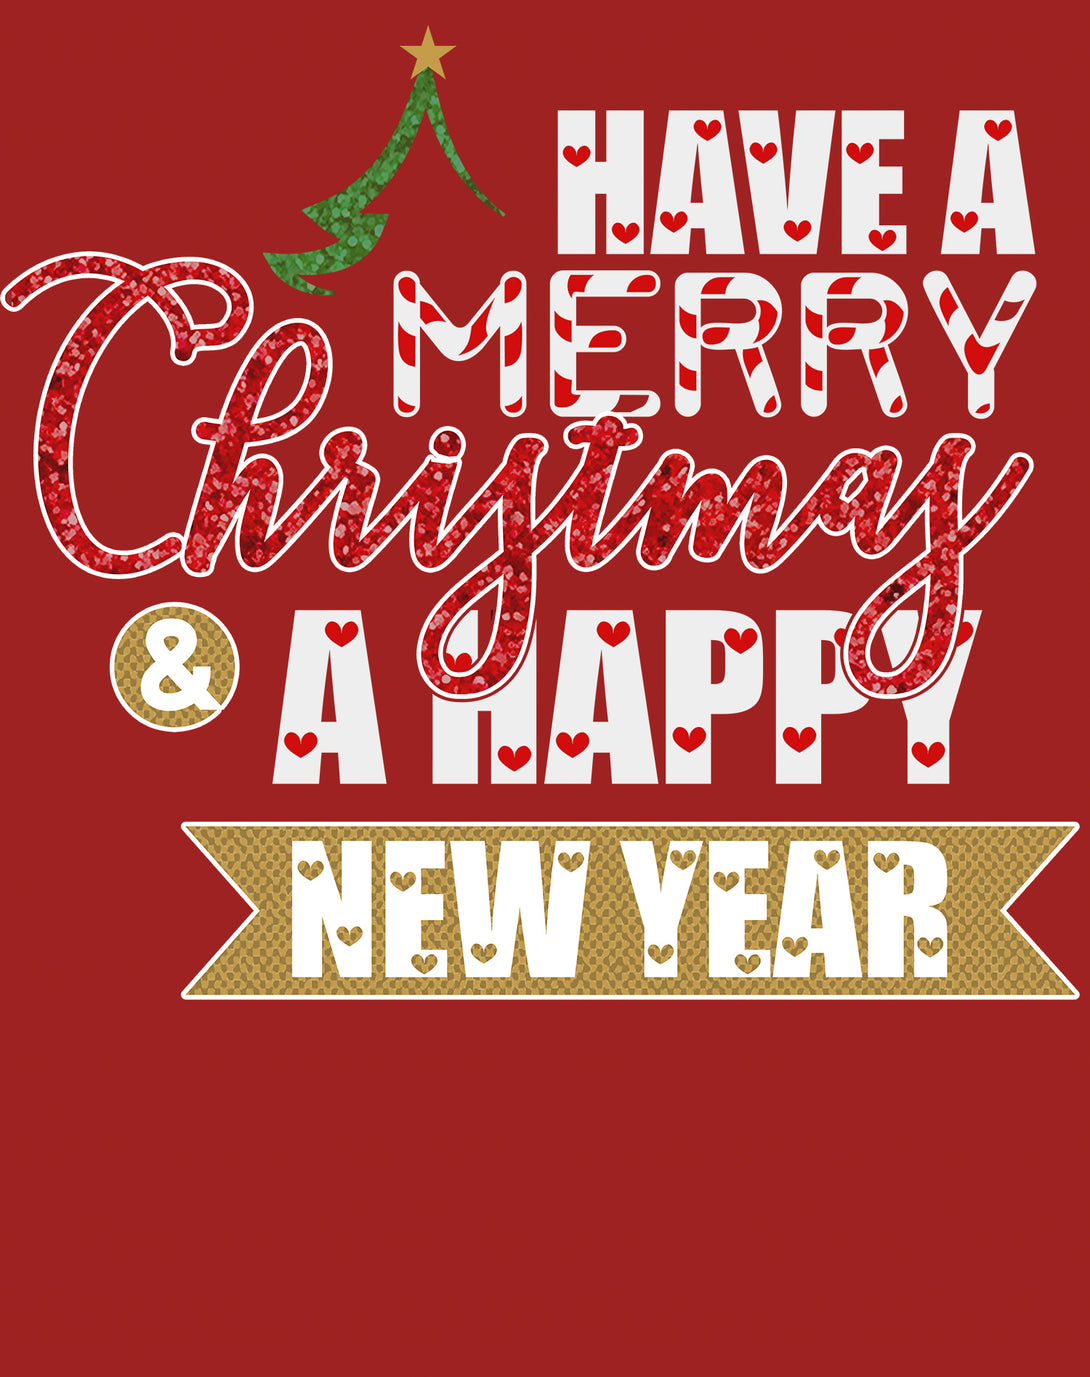 NYE Merry Christmas Happy New Year Hearts Party Xmas Eve Men's T-Shirt Red - Urban Species Design Close Up